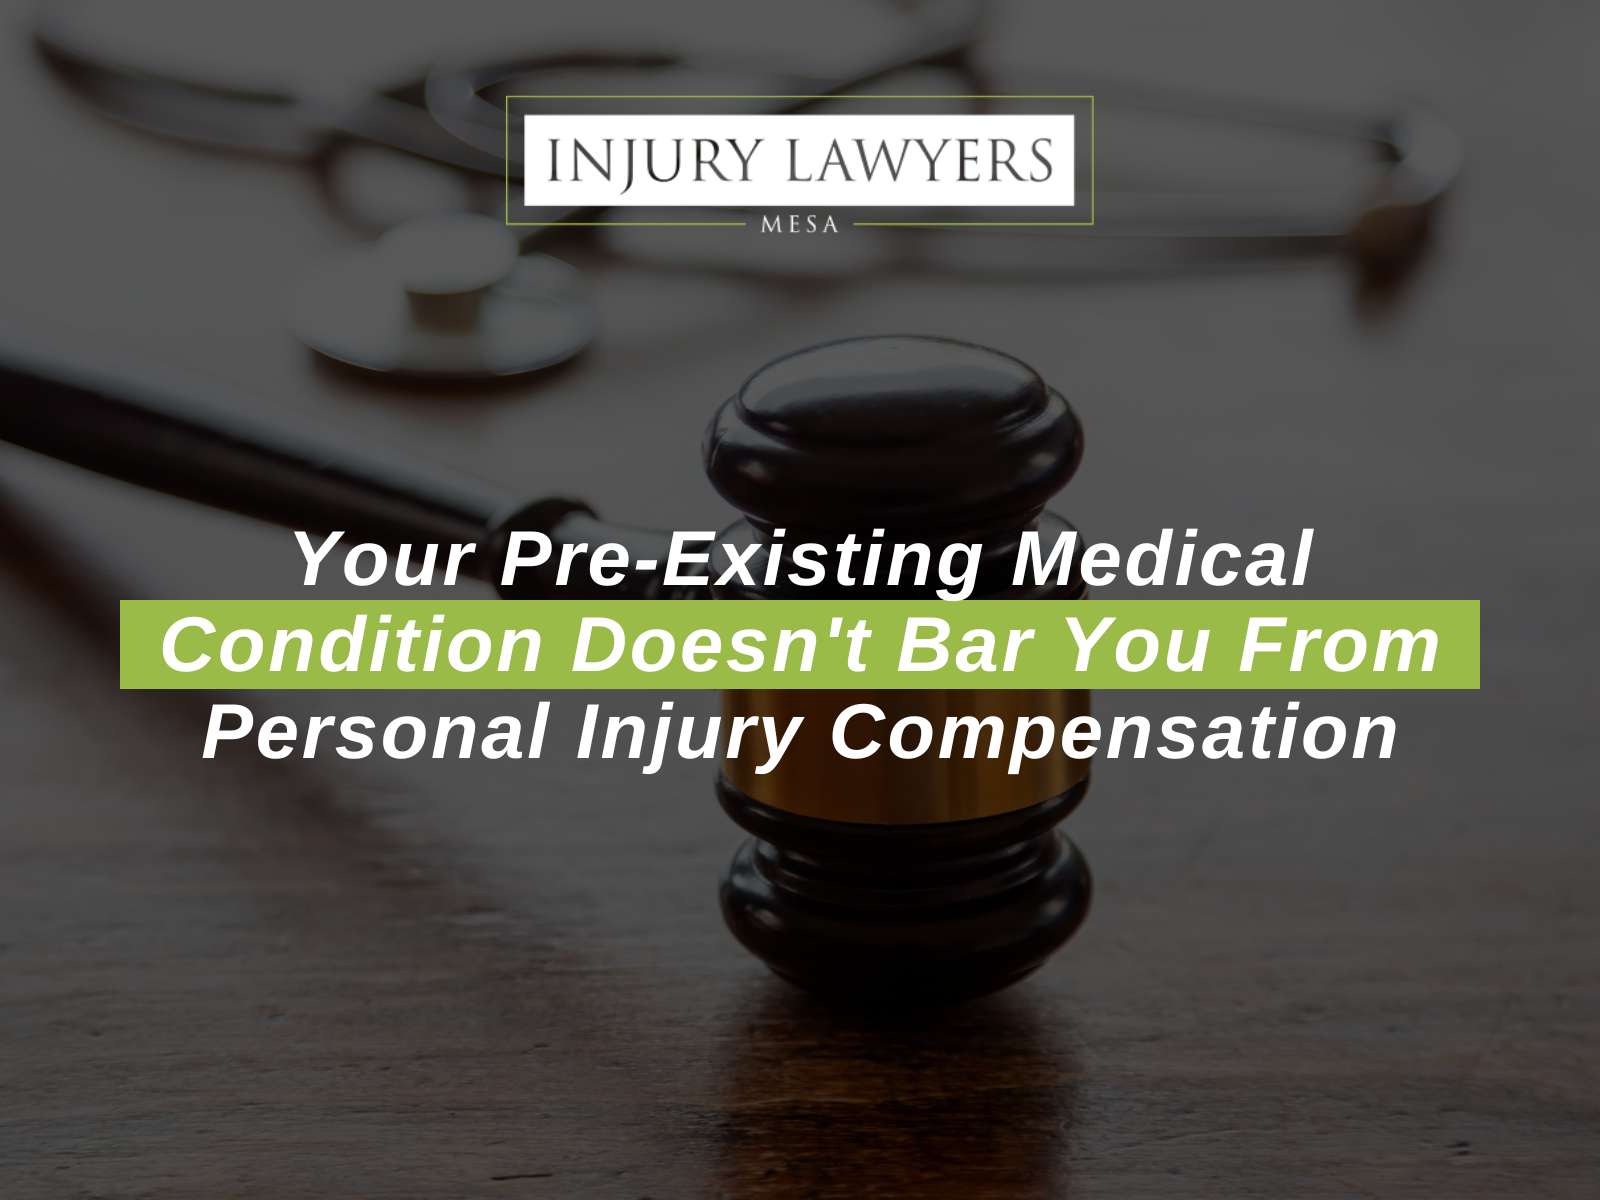 Your Pre-Existing Medical Condition Doesn't Bar You From Personal Injury Compensation